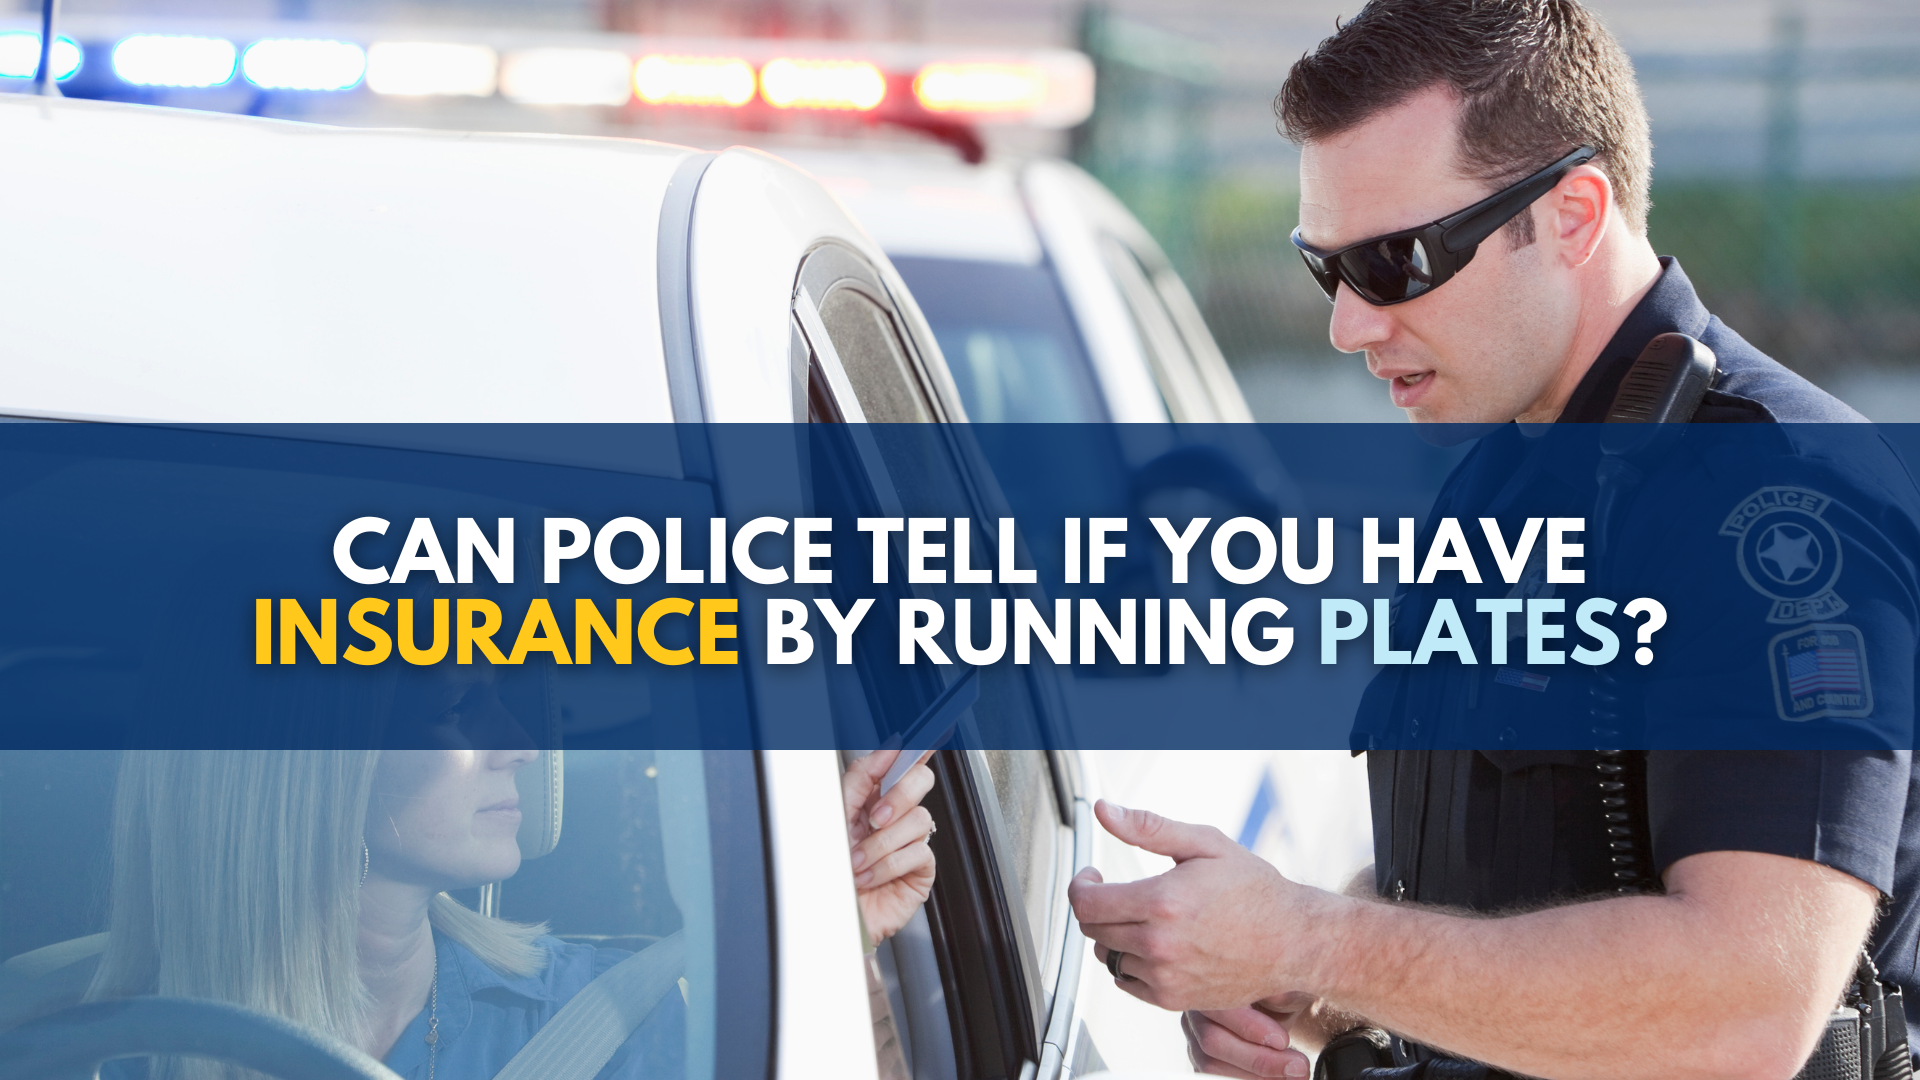 Can police tell if you have insurance by running plates?